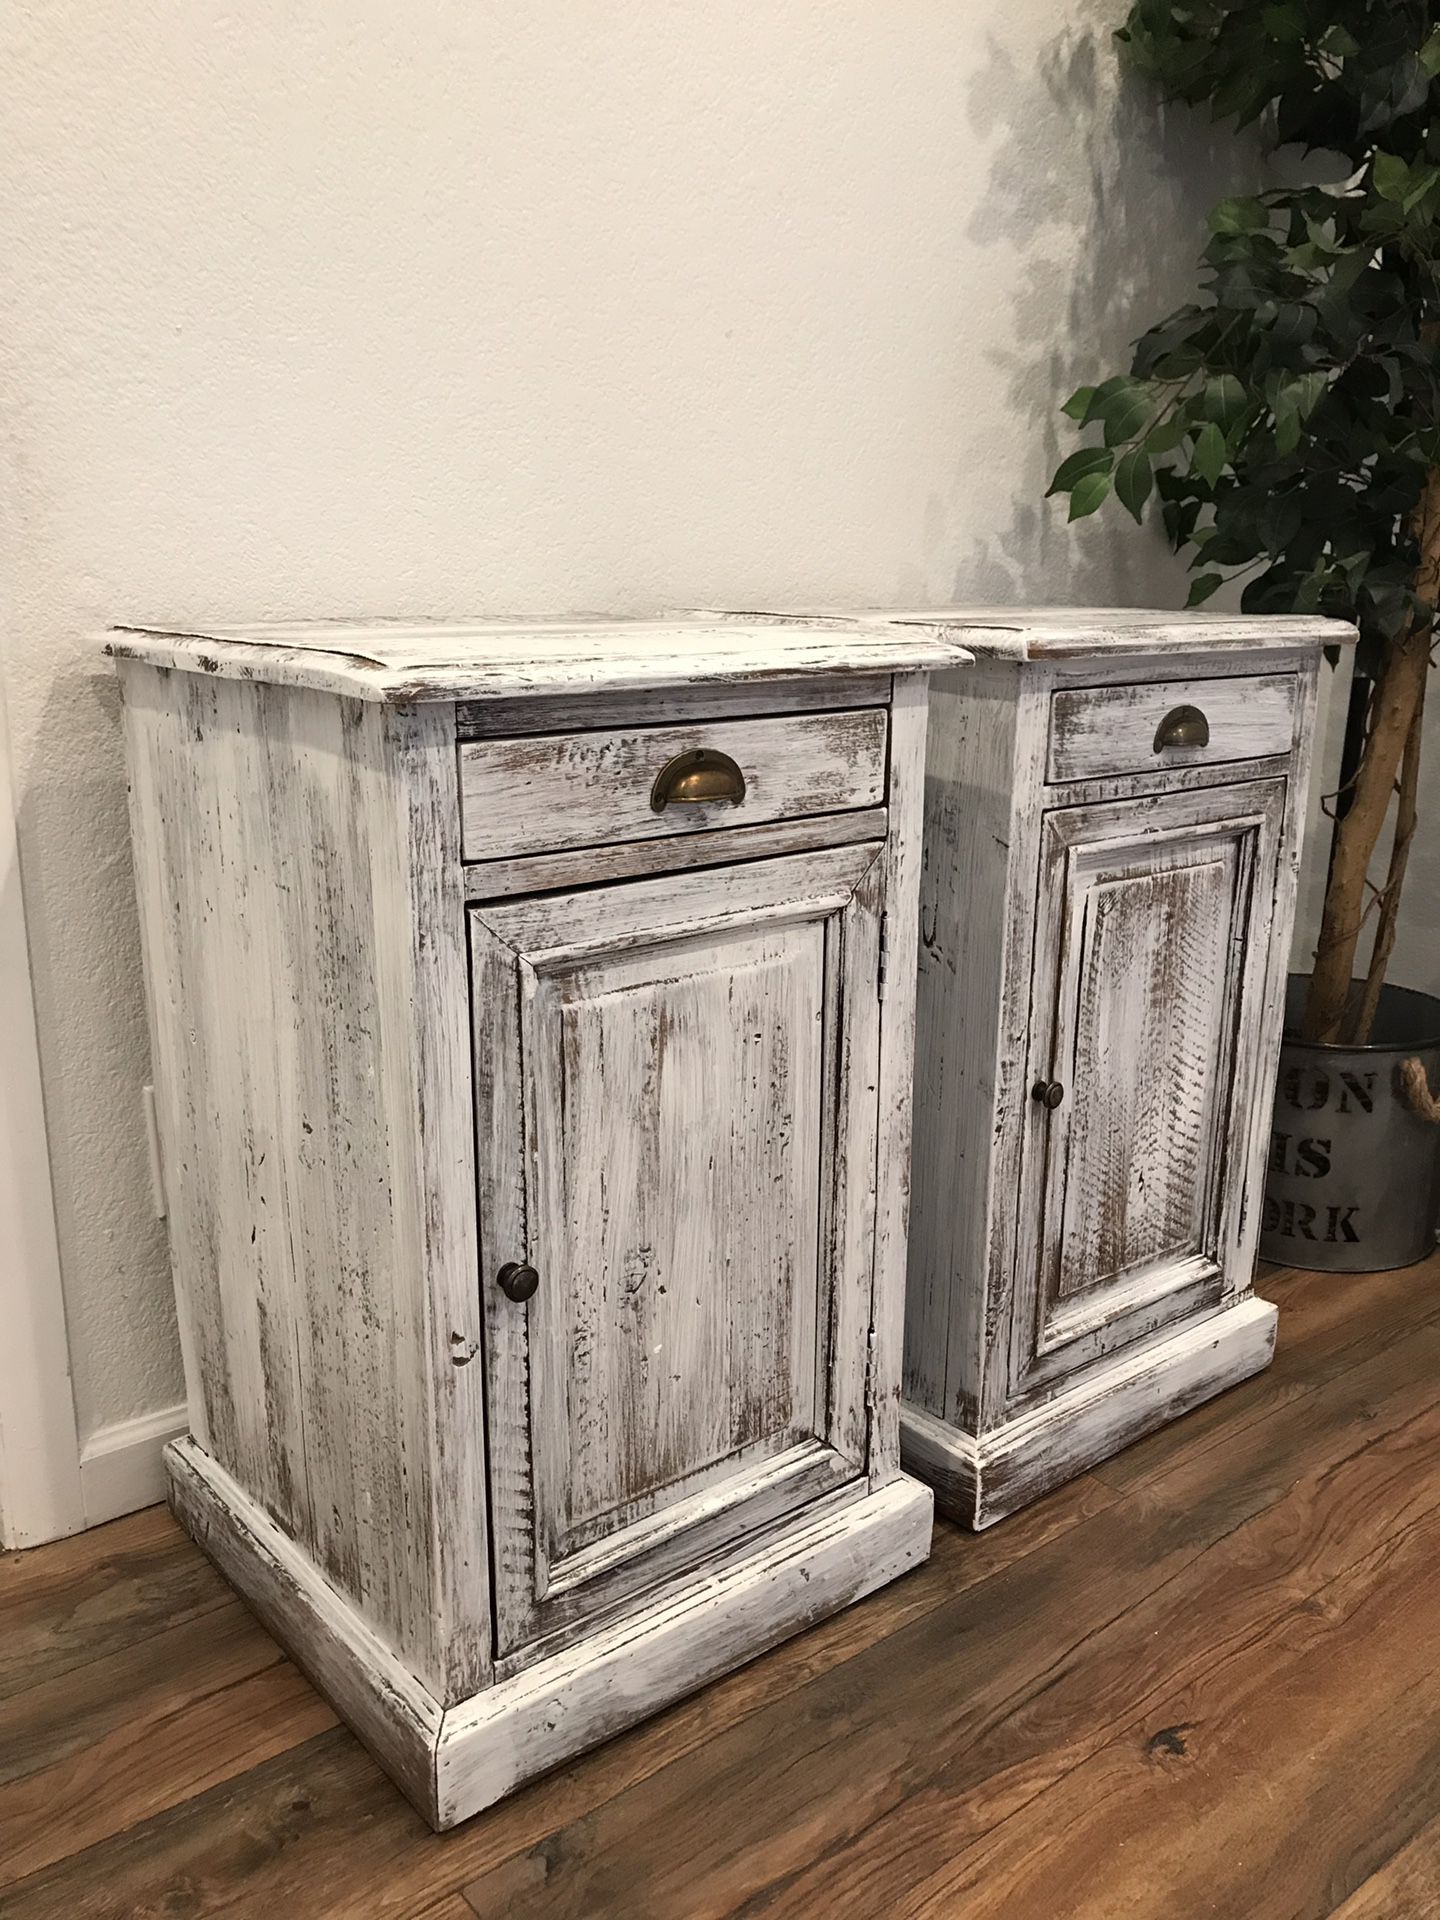 Real solid wood rustic / farmhouse style tall end tables / nightstands